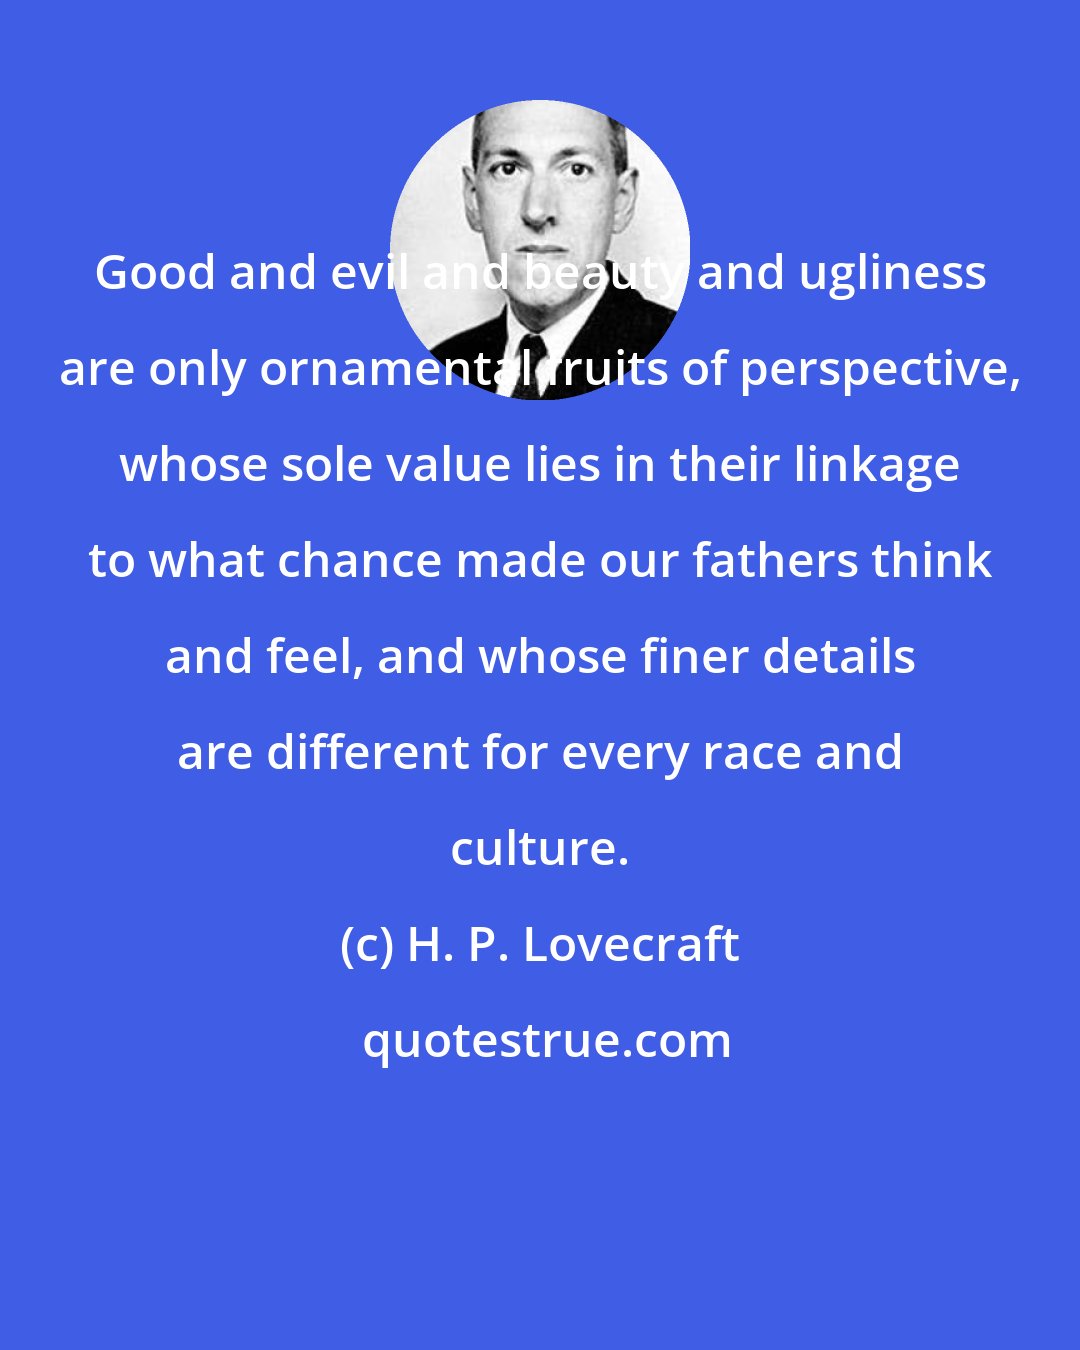 H. P. Lovecraft: Good and evil and beauty and ugliness are only ornamental fruits of perspective, whose sole value lies in their linkage to what chance made our fathers think and feel, and whose finer details are different for every race and culture.